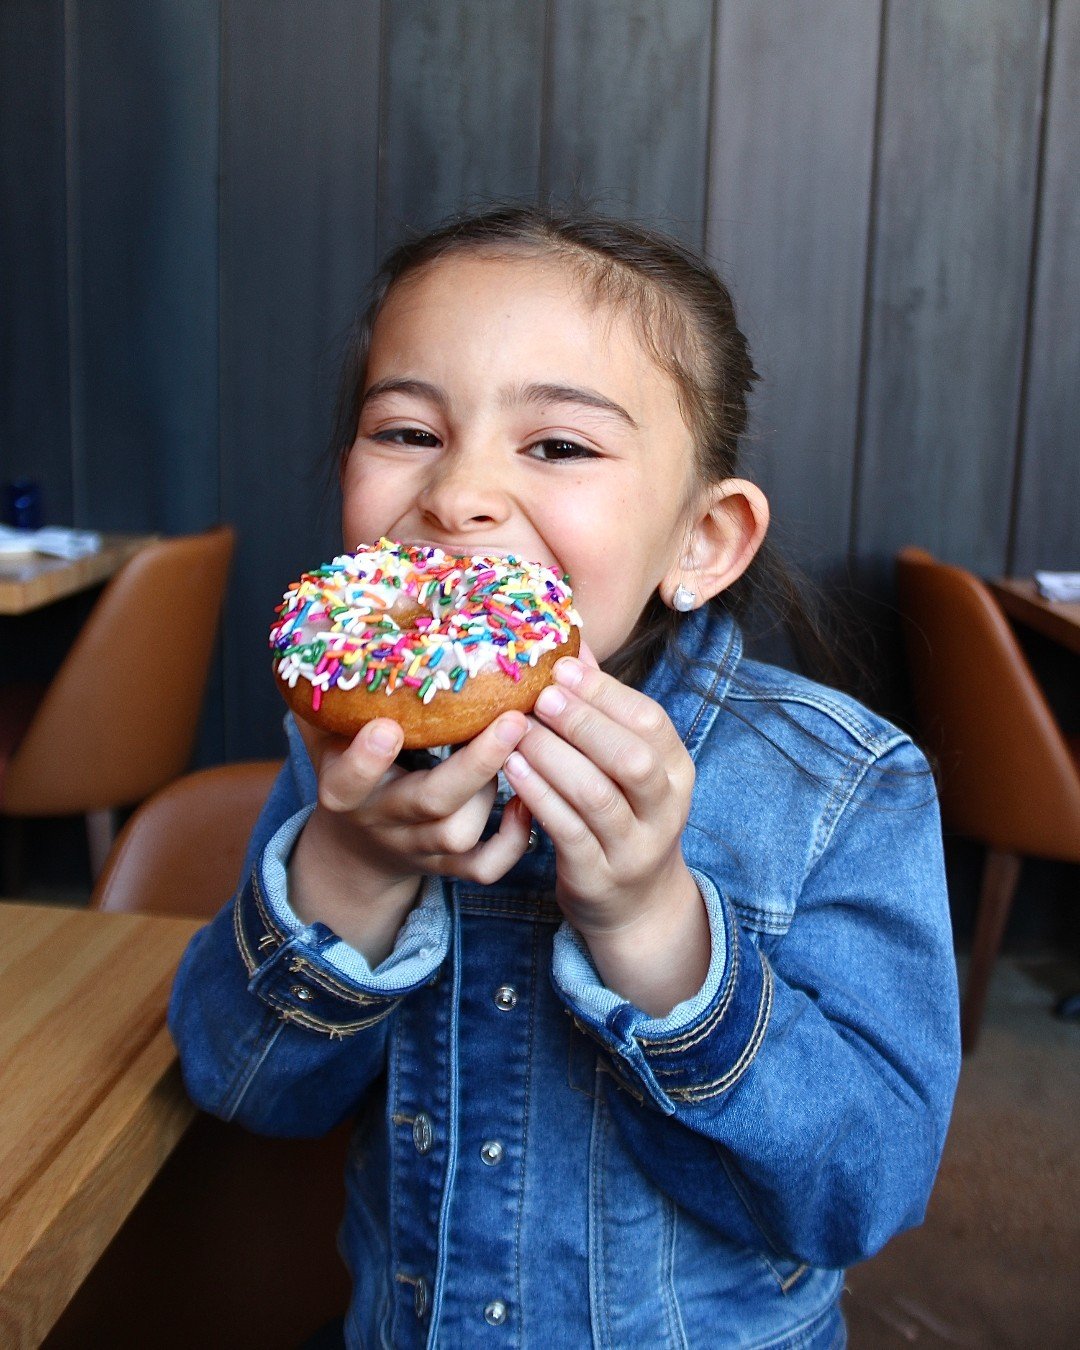 Join us for brunch every Saturday and Sunday 10am-2pm to try our Doughnut Tower -- a homemade assortment of sweet and savory doughnuts!

📸: @living.for.three